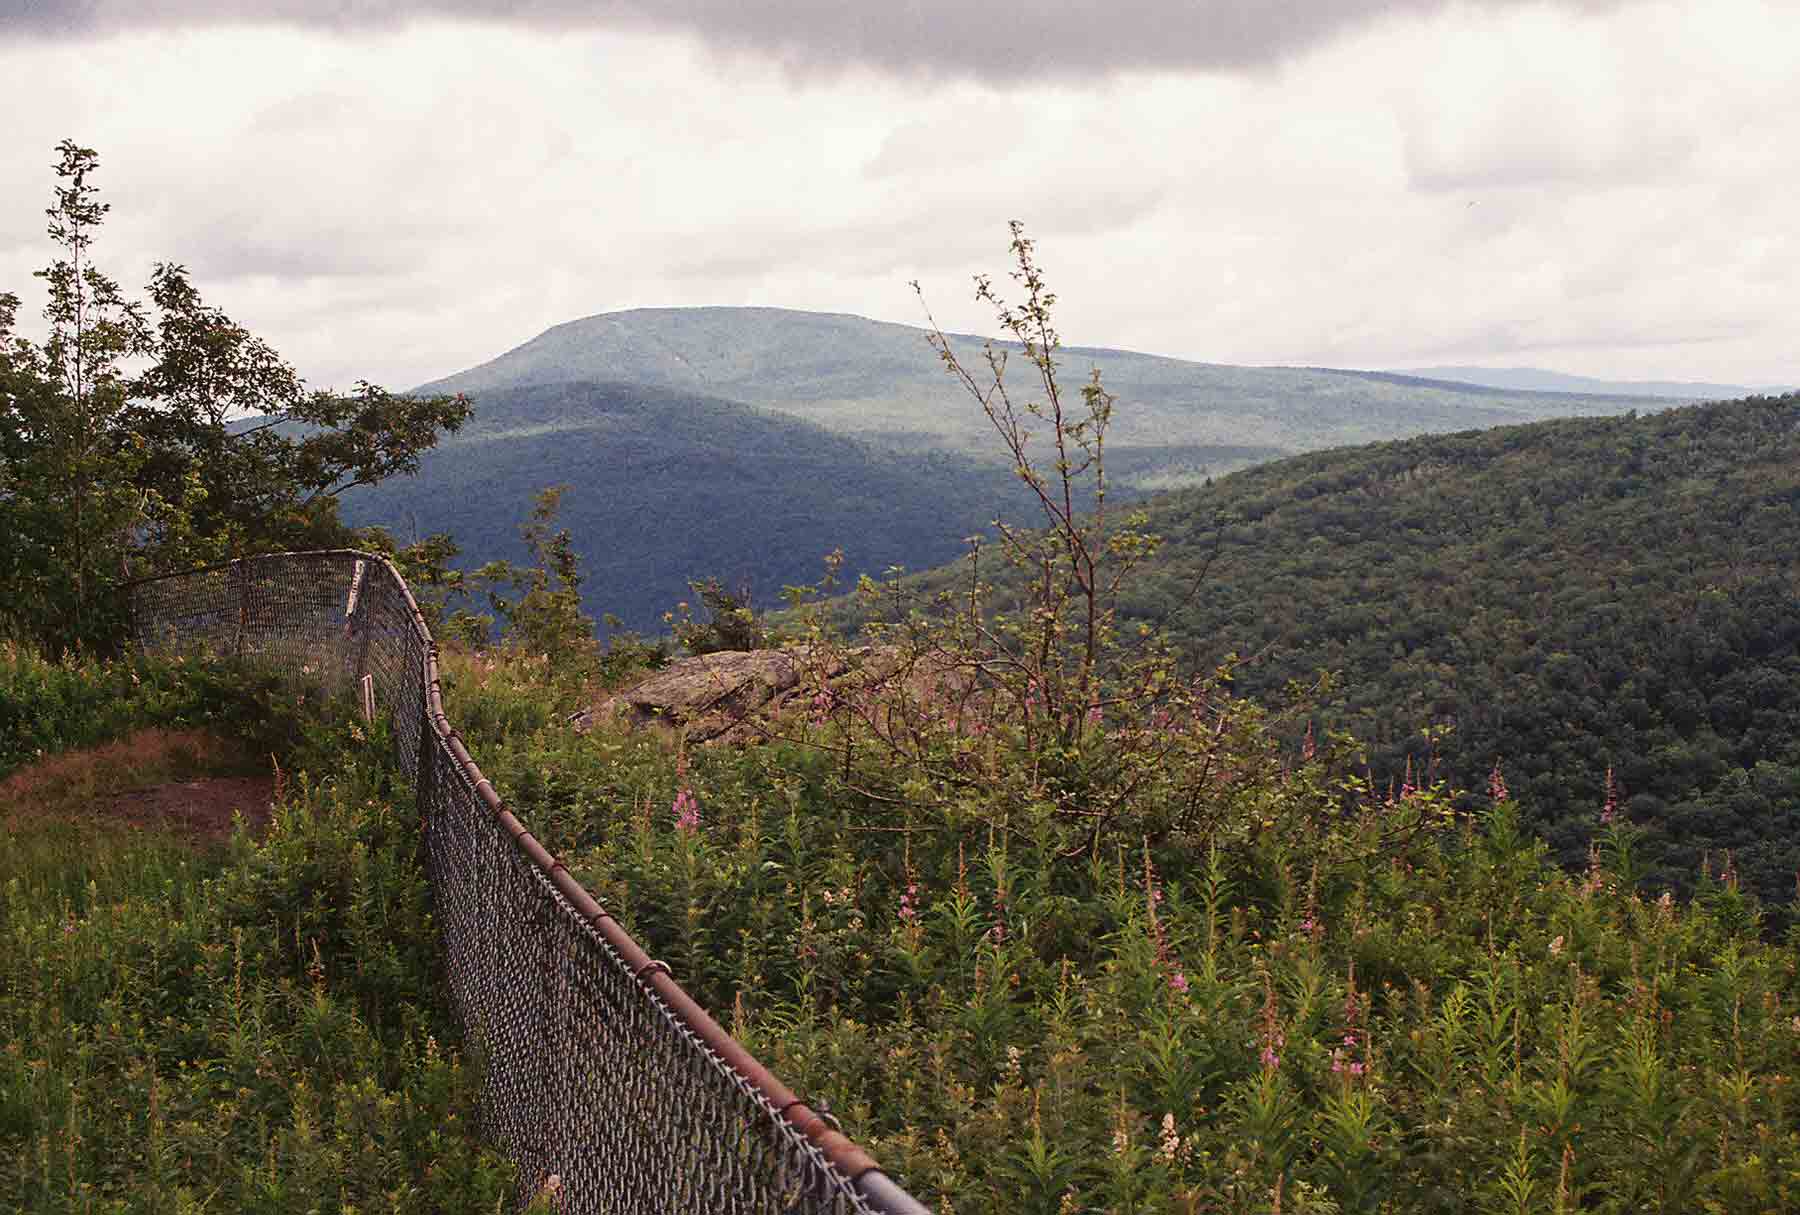 mm 1.4 - Smart's Mt. from Holts Ledges.  The fence is there to protect nesting peregrine falcons. Courtesy dlcul@conncoll.edu